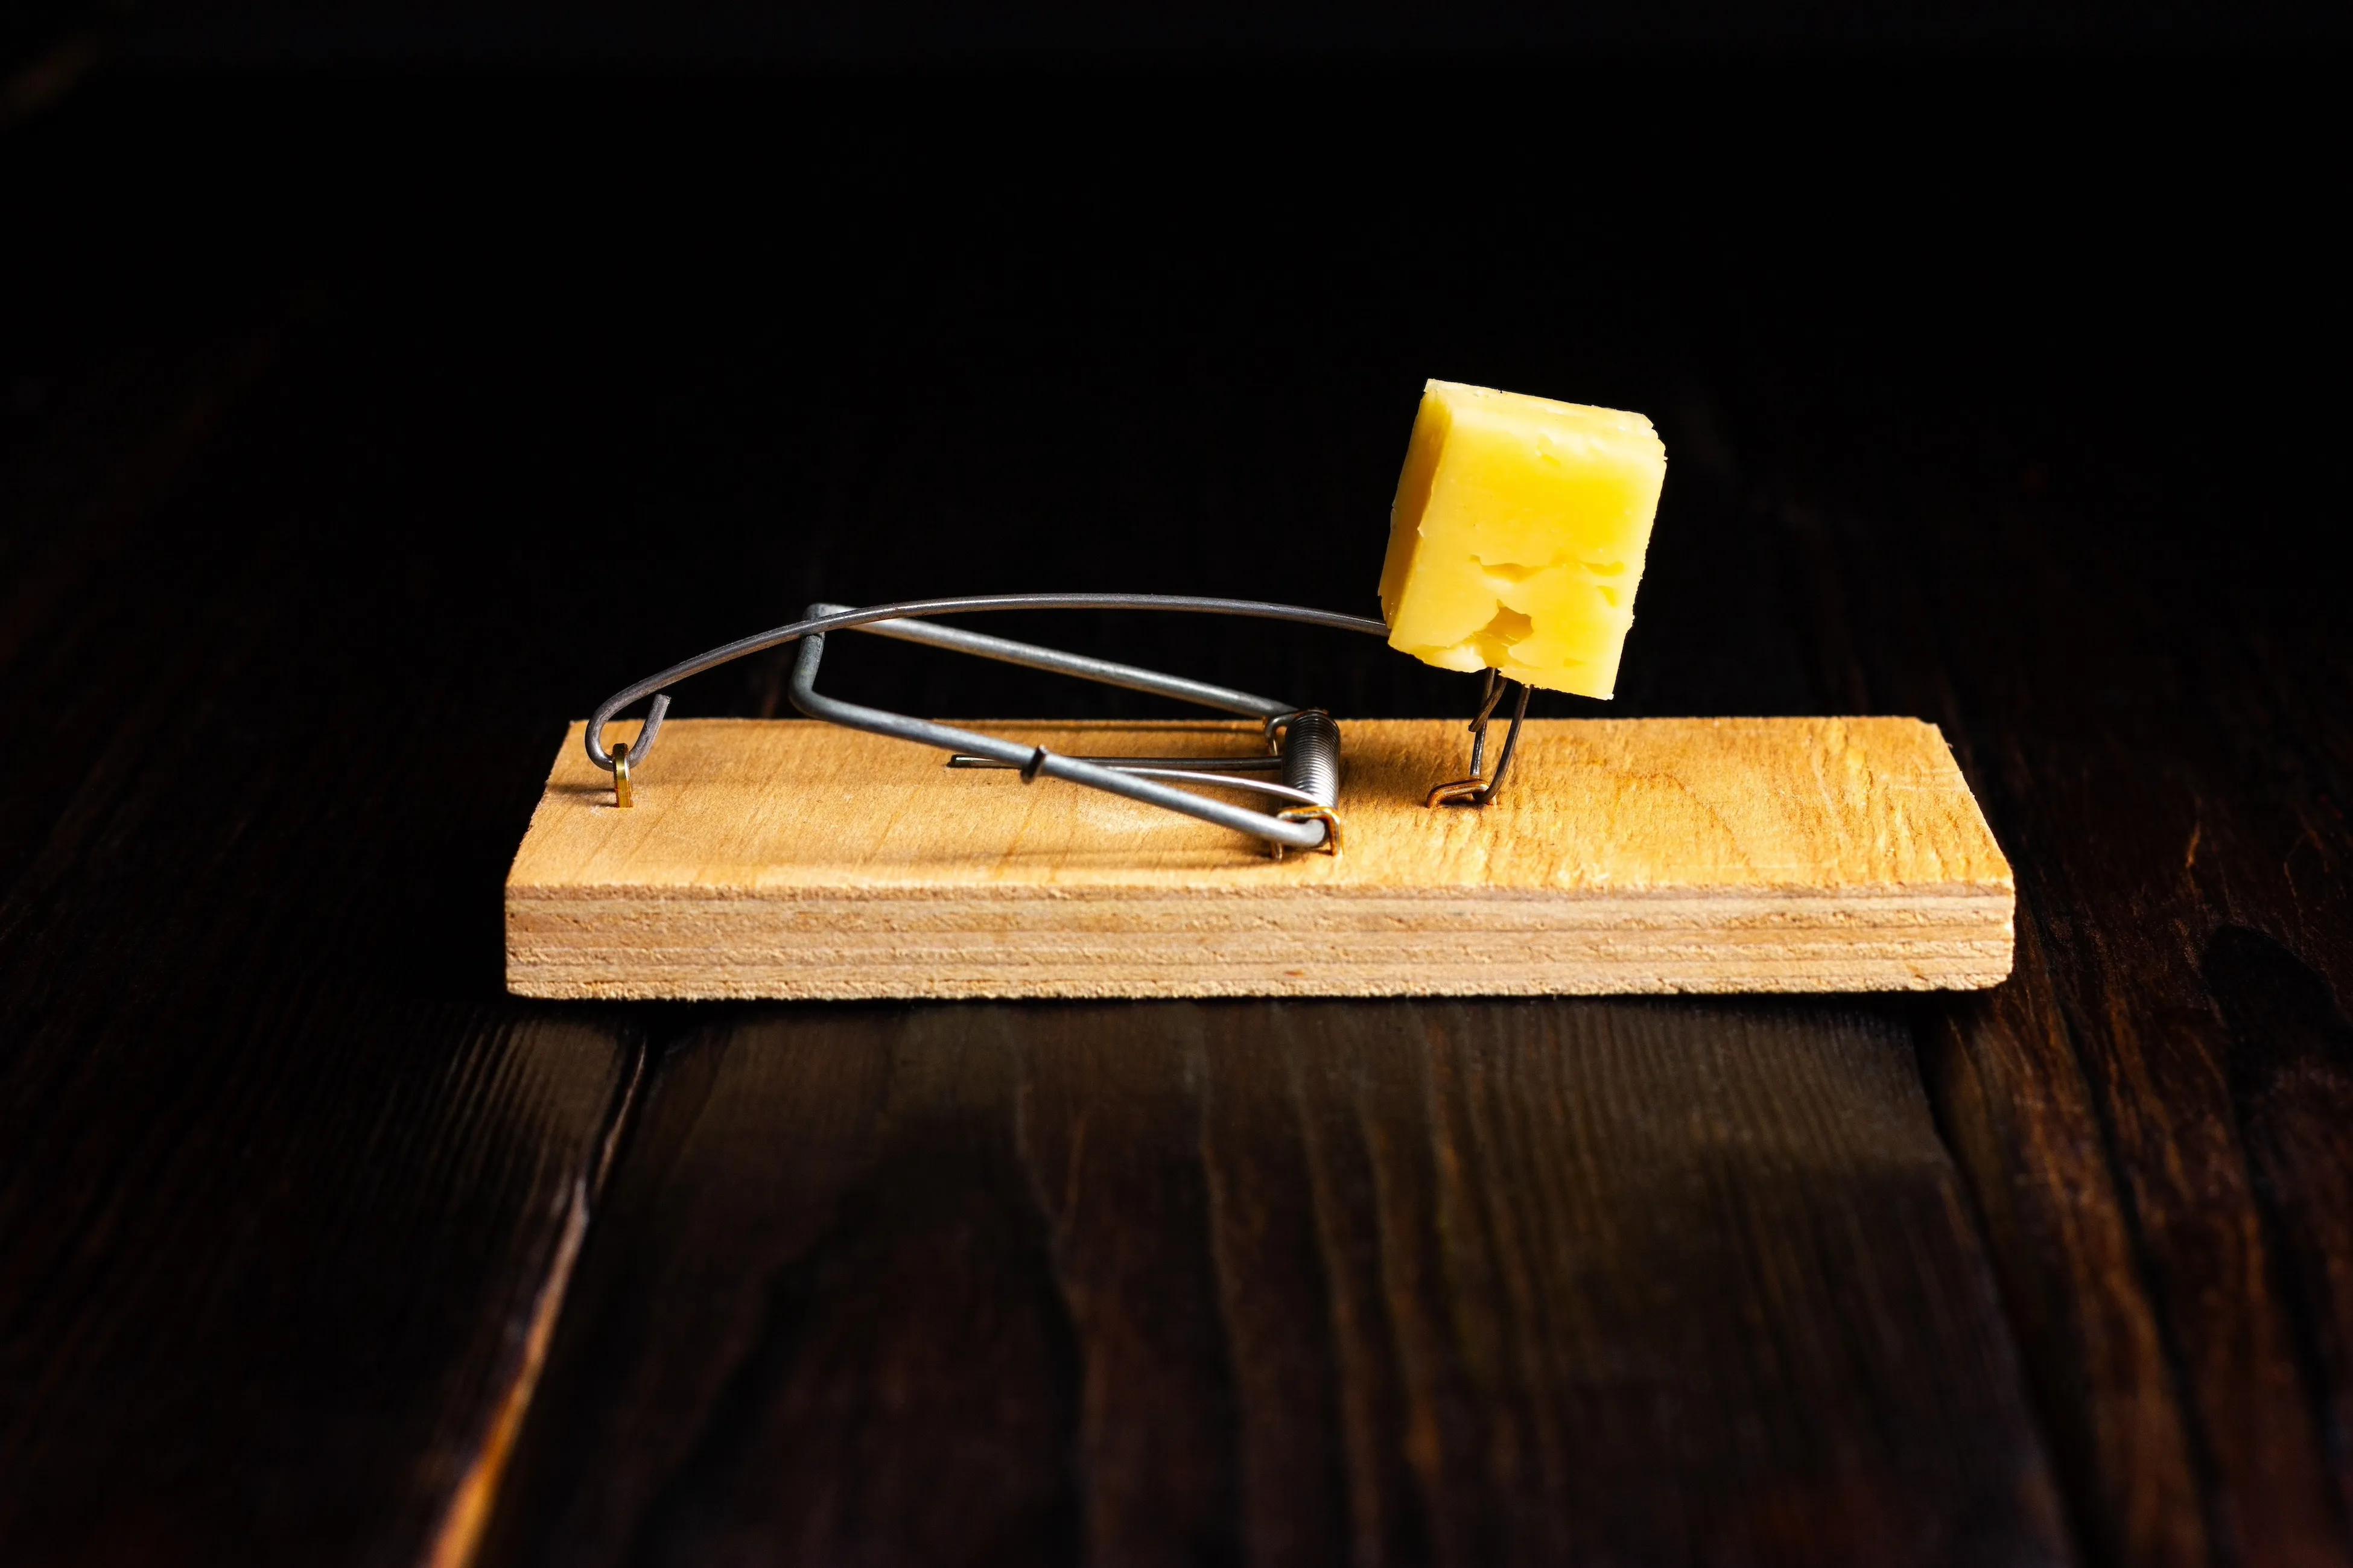 A mousetrap with cheese on it